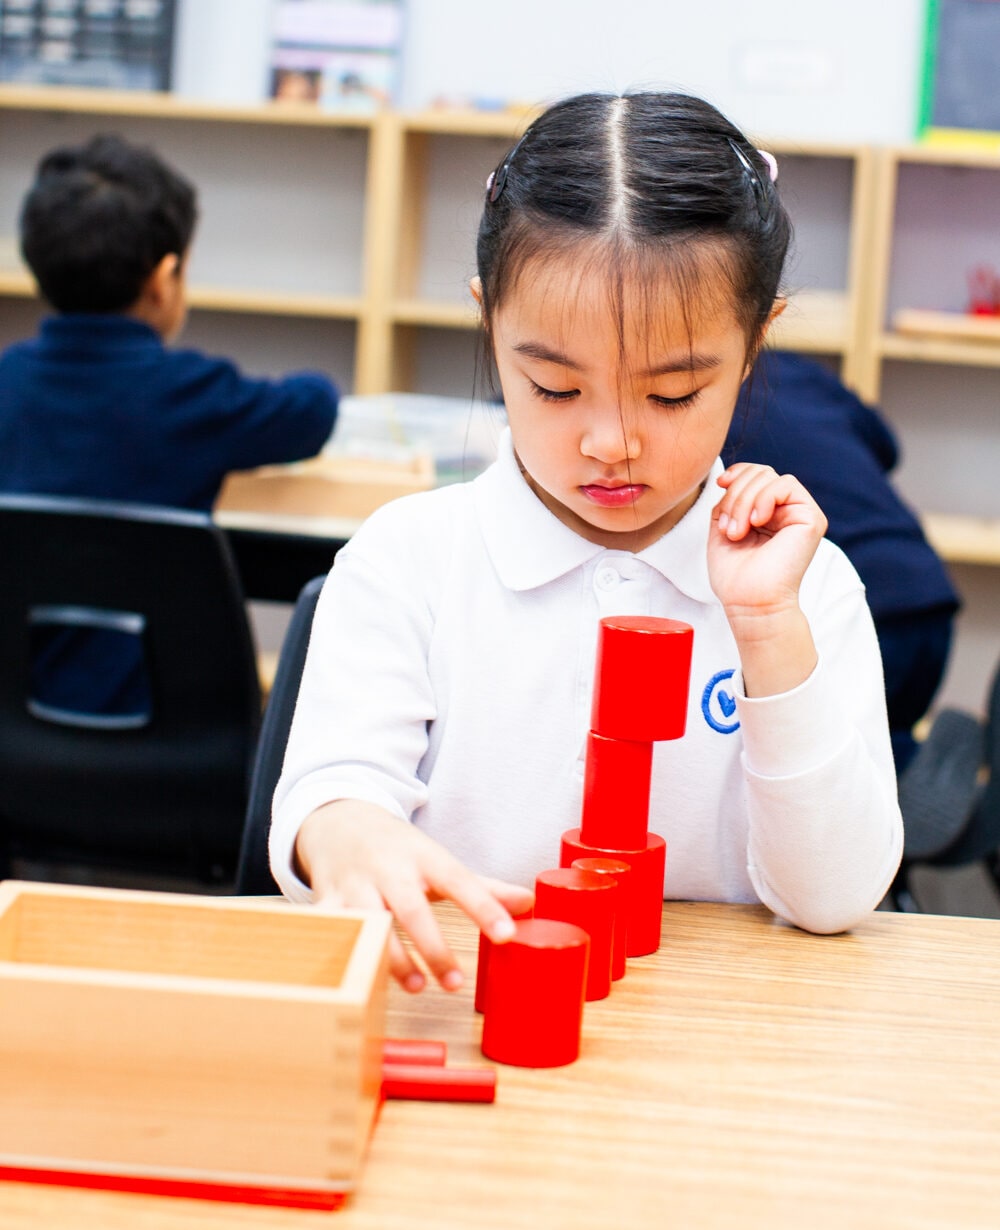 Girl building tower with red blocks